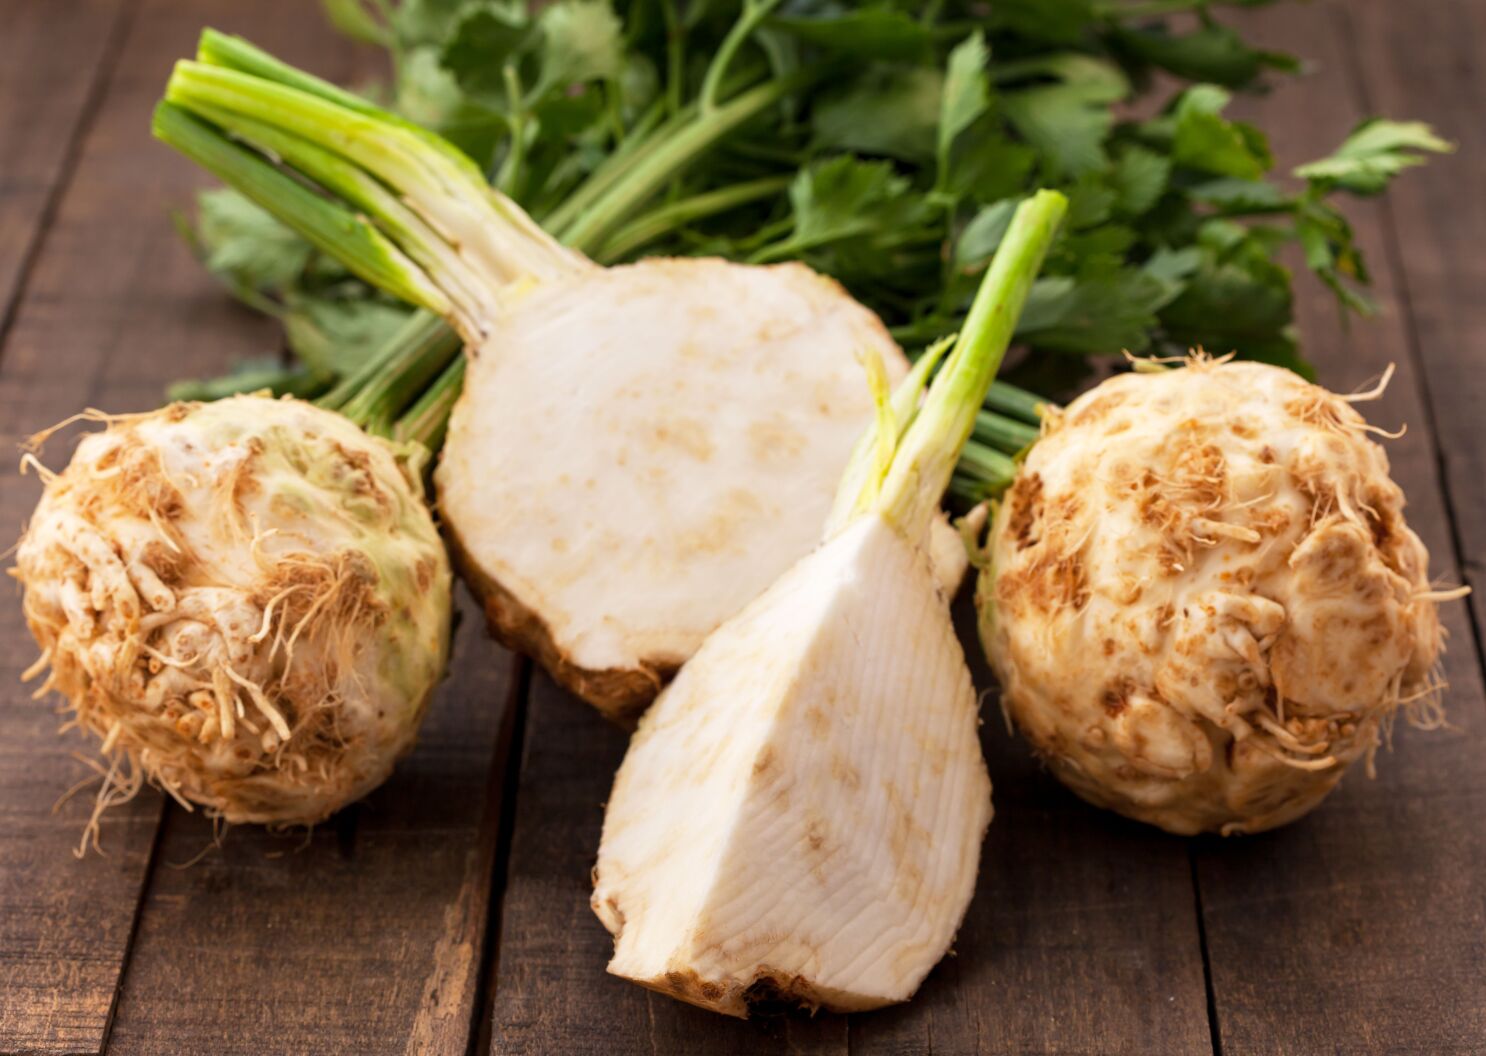 The rich fiber content of parsley root can also benefit your digestive system. Fiber aids in maintaining a healthy gut by promoting regular bowel movements and preventing constipation. It can also help lower cholesterol levels and control blood sugar levels, making it beneficial for those with diabetes or at risk of developing it.